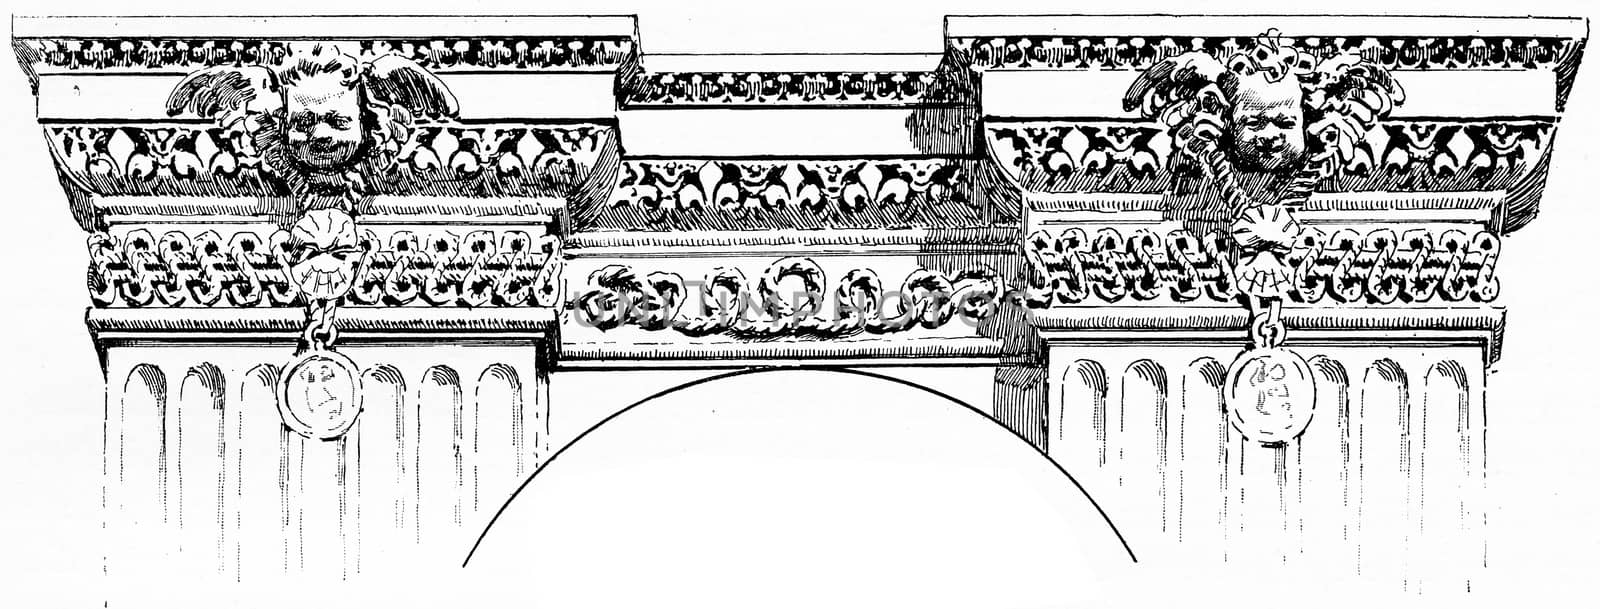 Details of a frieze for the Louvre palace, vintage engraving. by Morphart